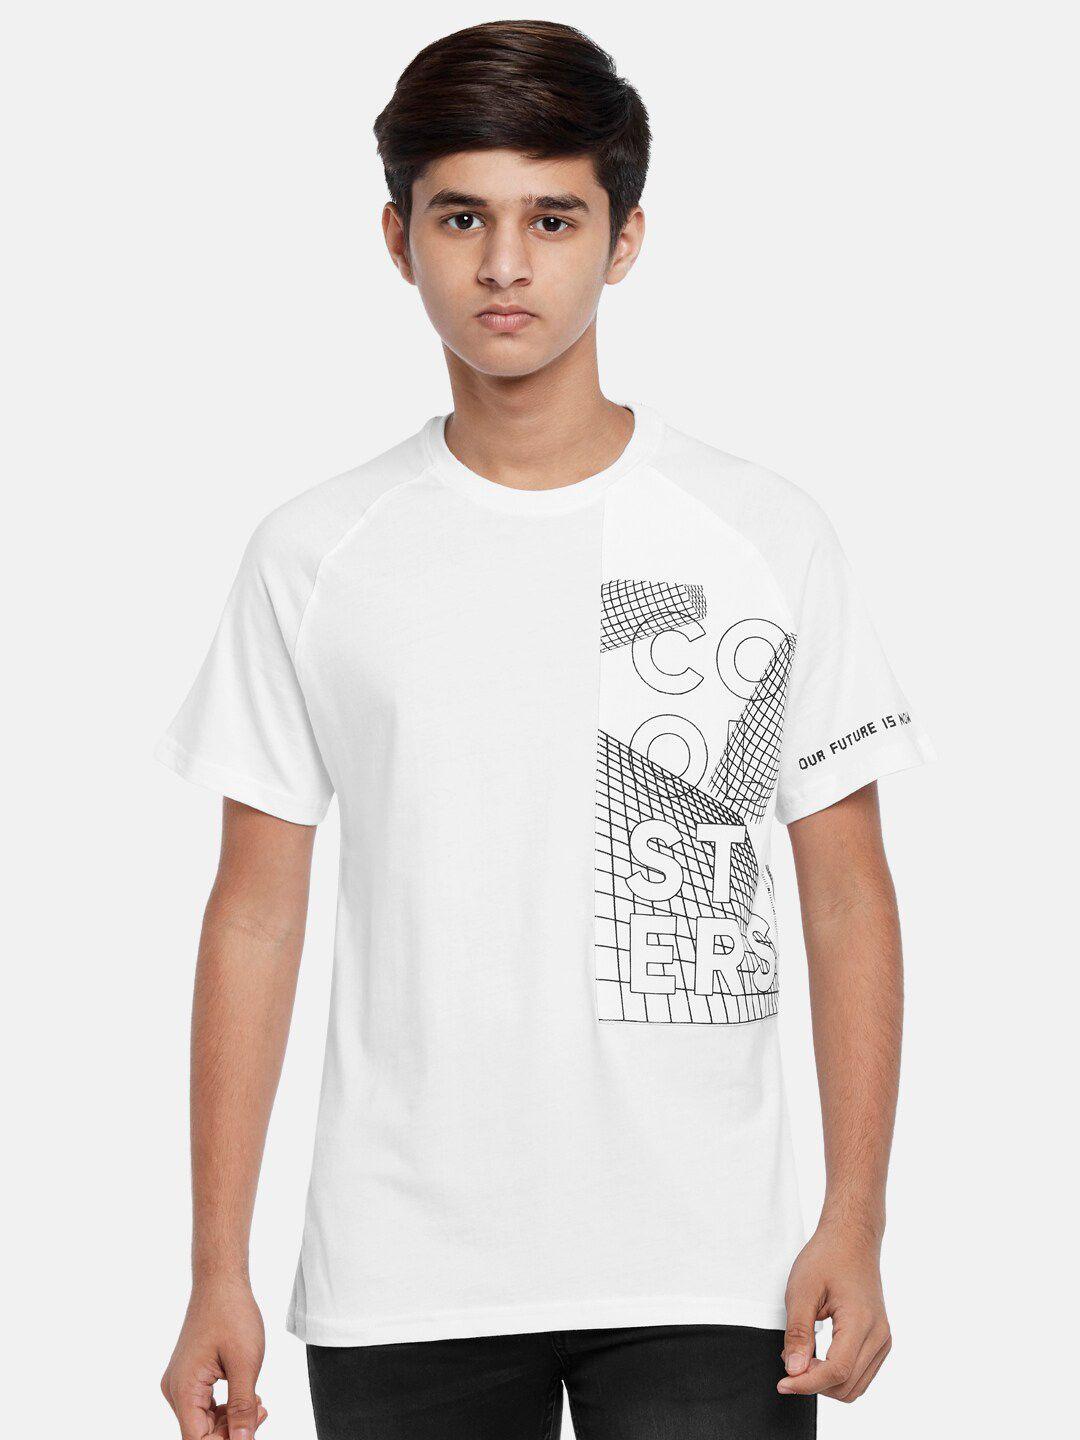 coolsters by pantaloons boys white printed applique t-shirt